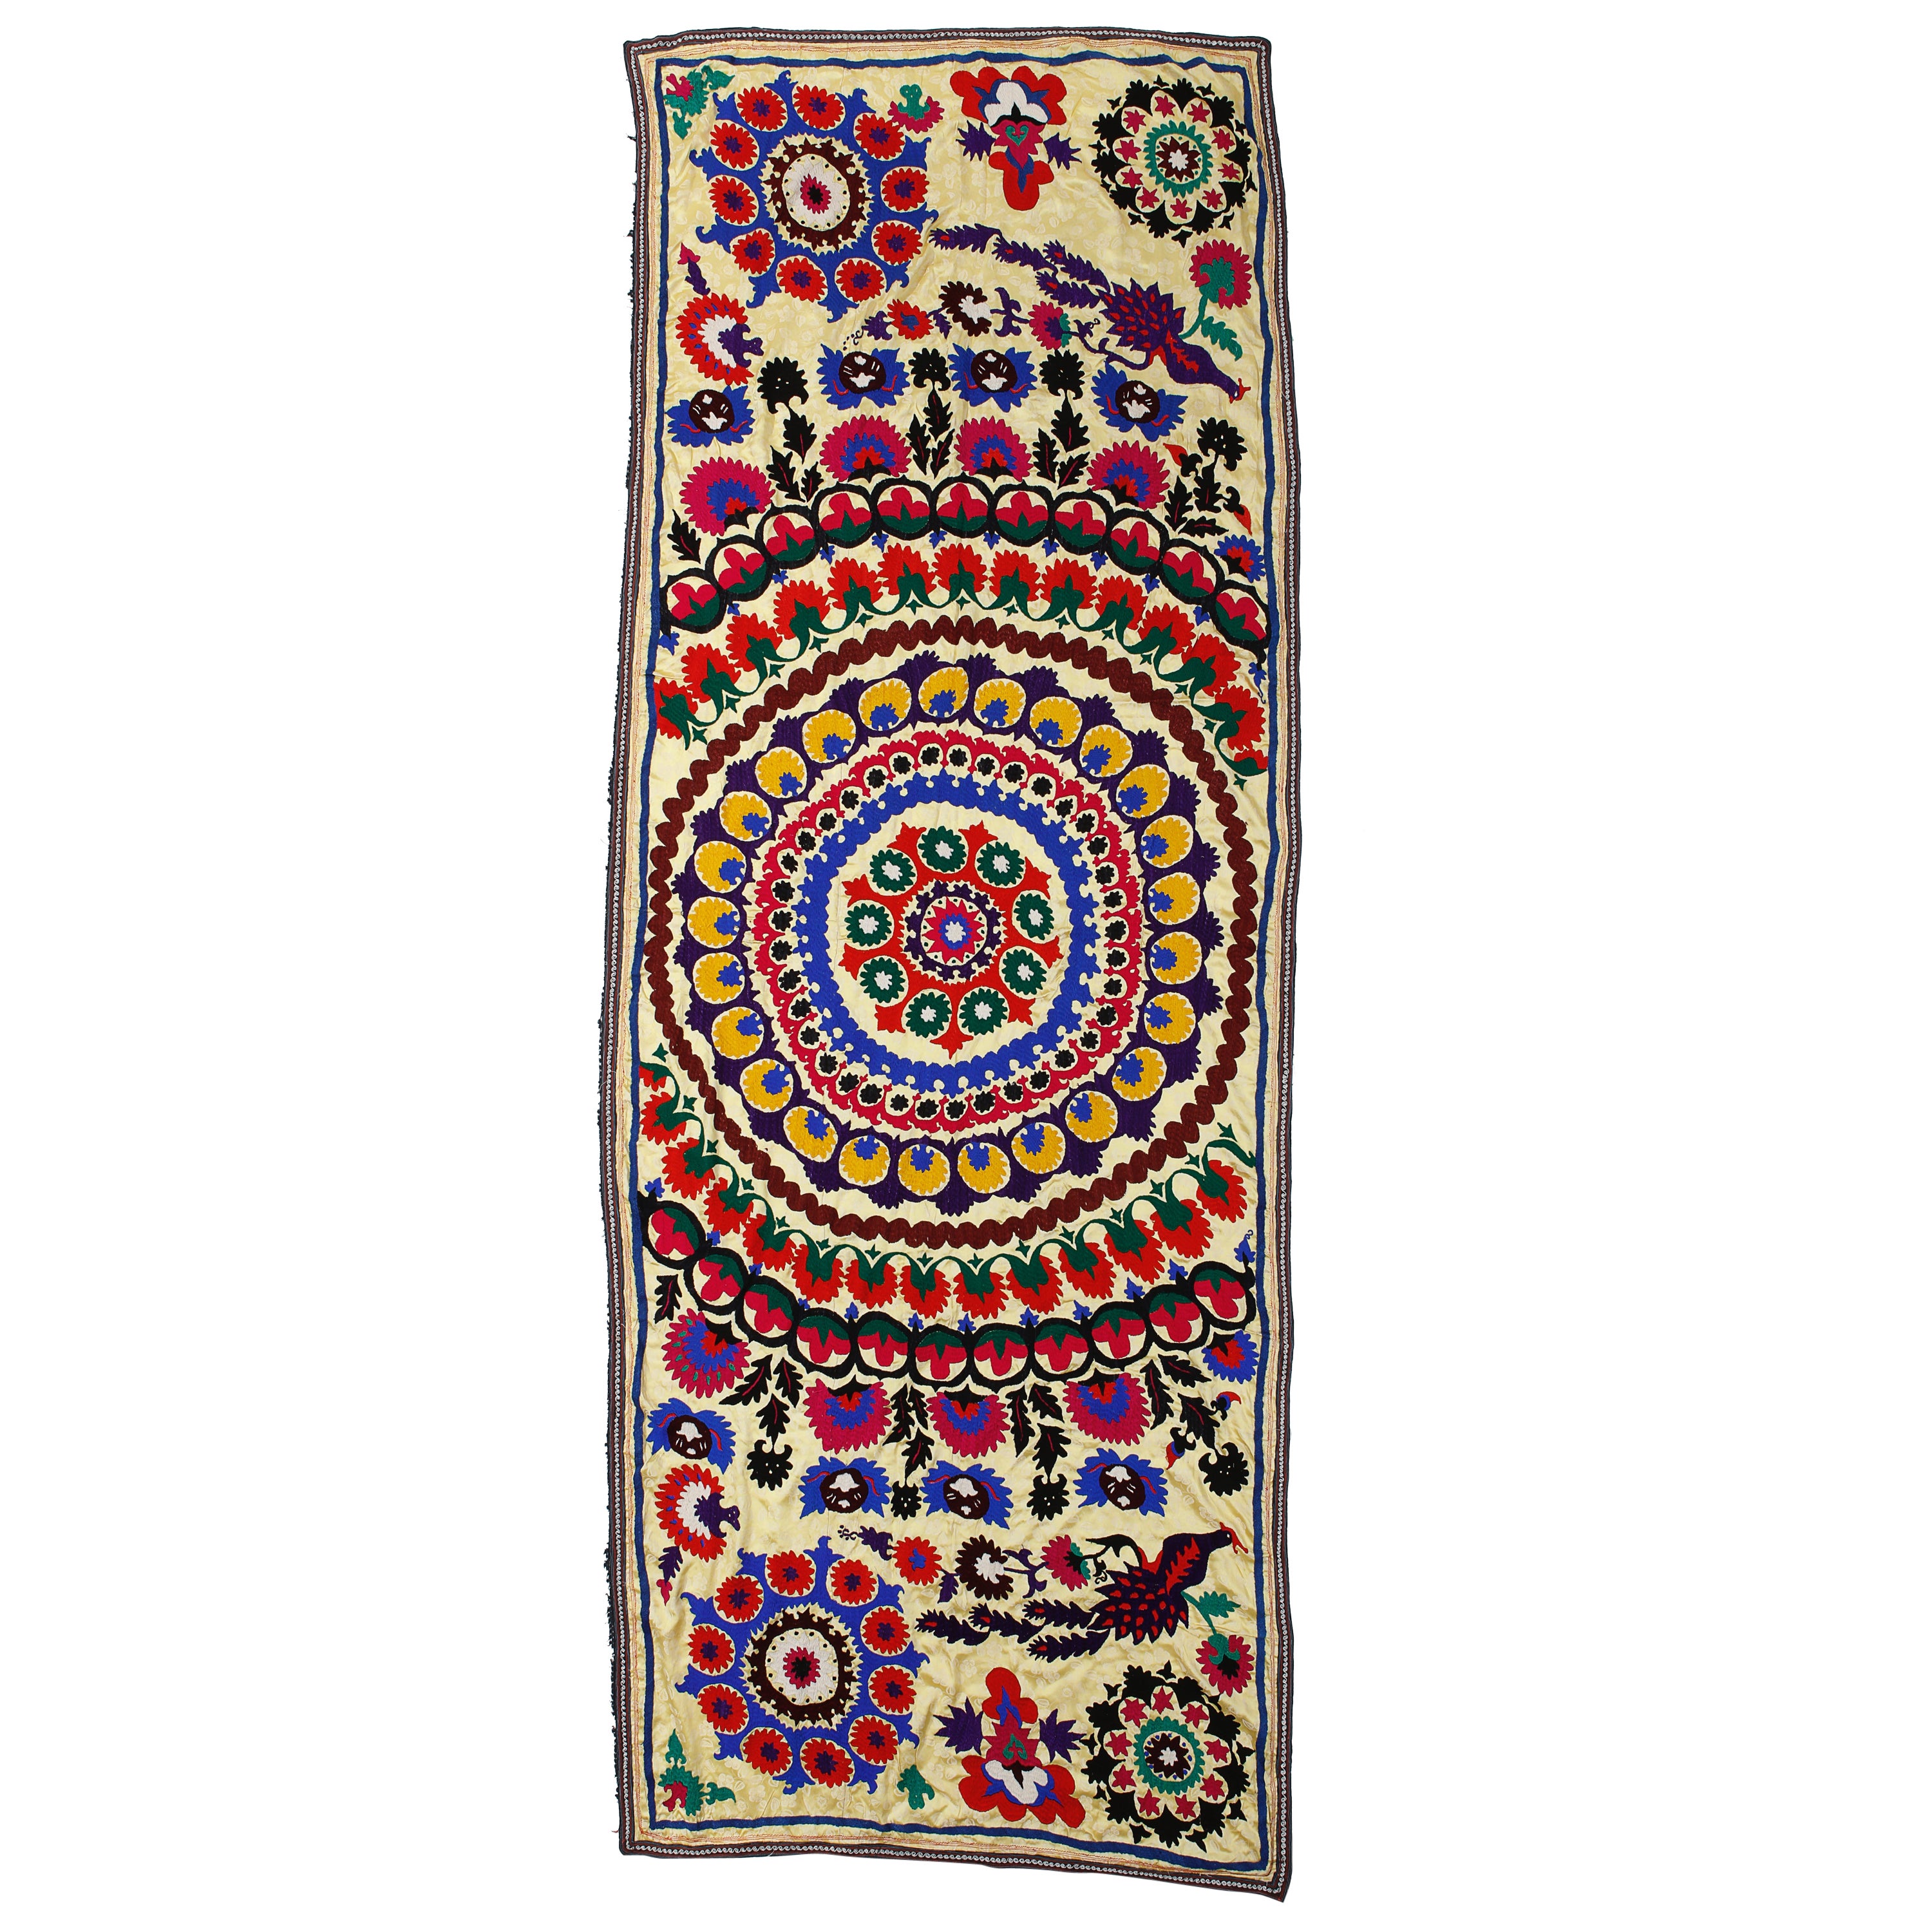 4.5x12 Ft Colorful Vintage Silk Embroidery Wall Hanging, Uzbek Suzani Tablecloth For Sale